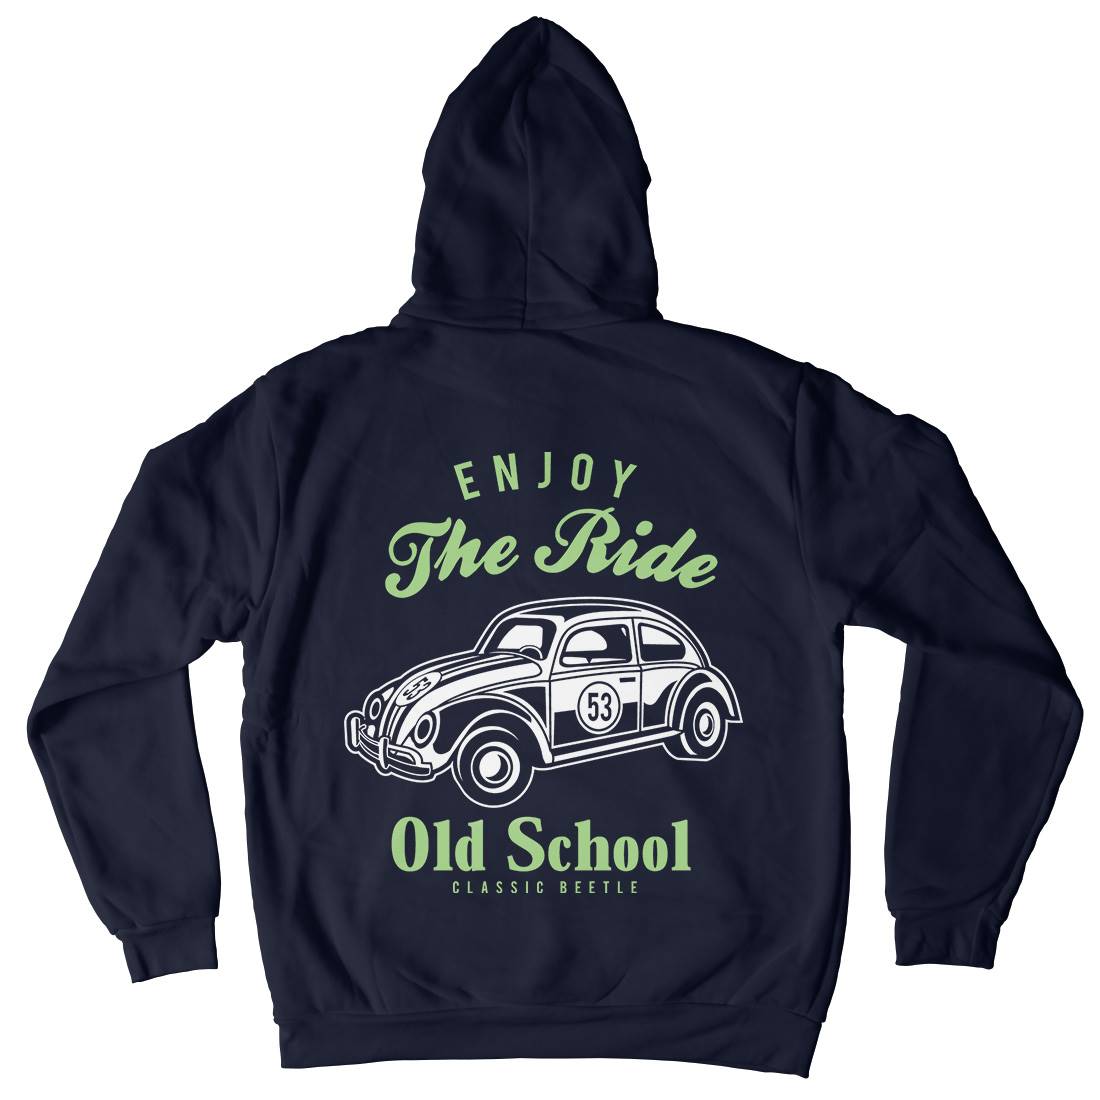 Enjoy The Ride Mens Hoodie With Pocket Cars A047